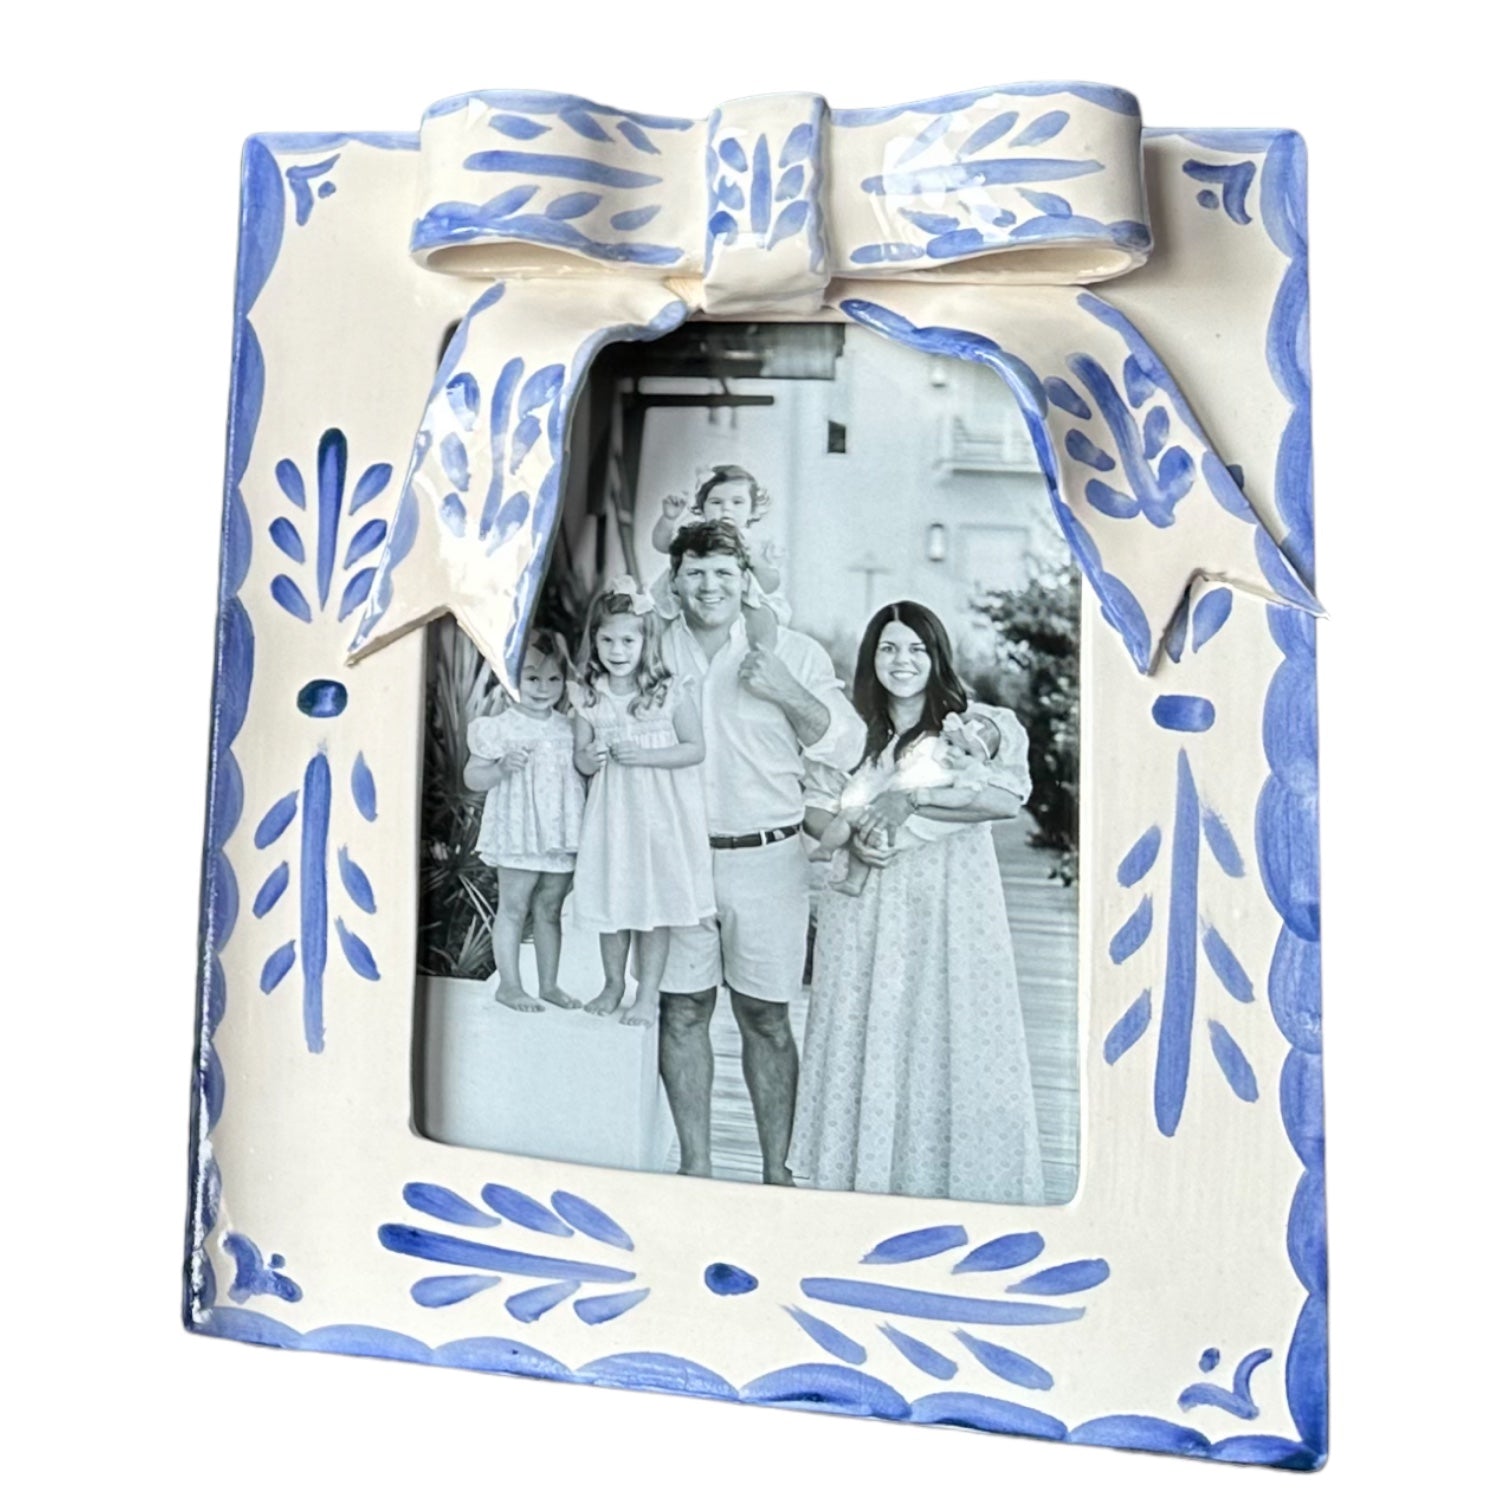 Ceramic Frame - Blue Bow - Premium  from Tricia Lowenfield Design 